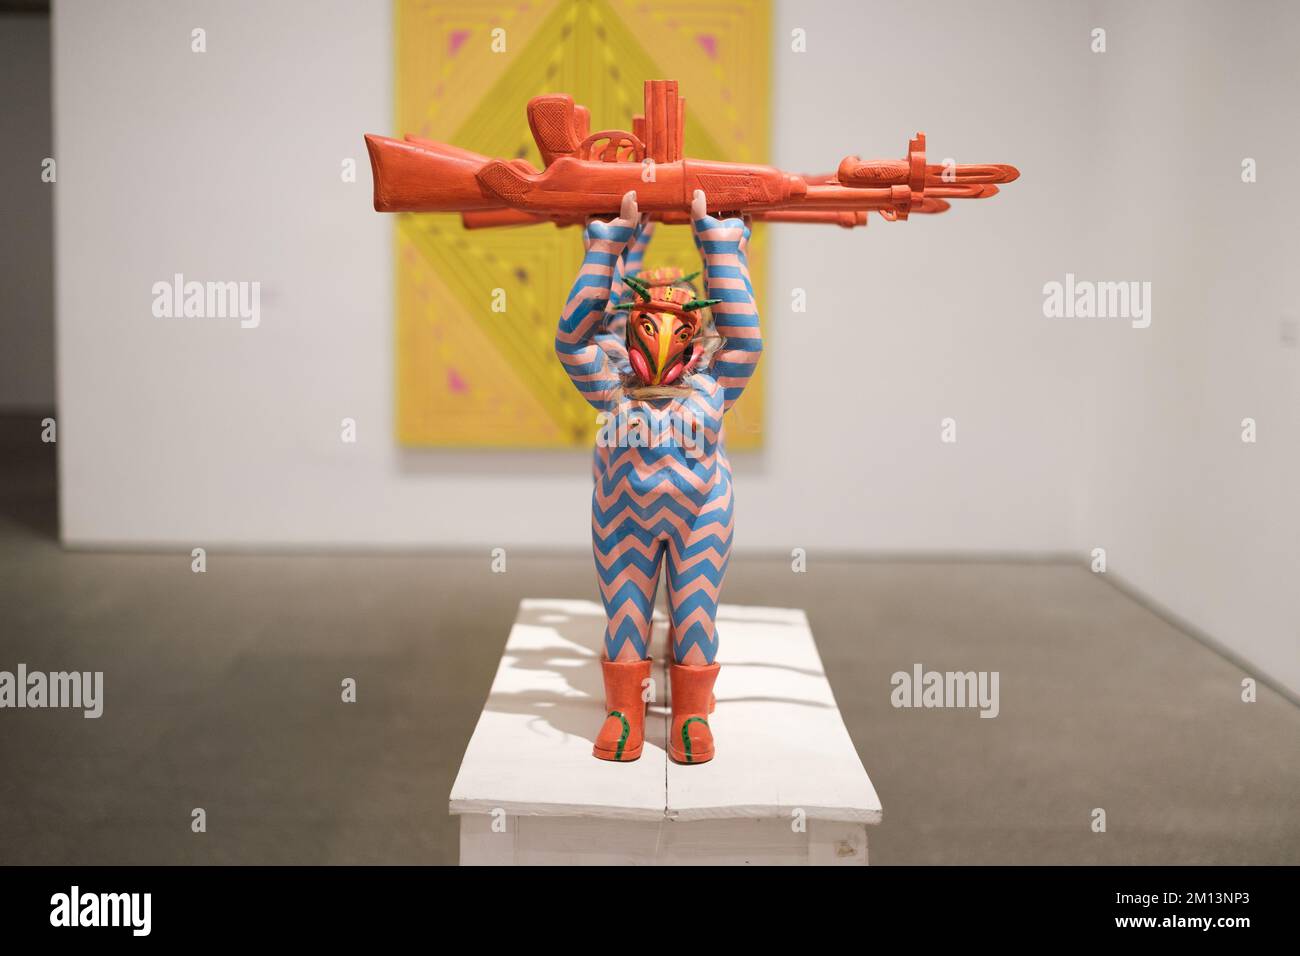 Madrid, Spain. 9th Dec, 2022. A sculpture titled ''the guerrillas'' seen during the opening of the exhibition by Guatemalan artist Margarita Azurdia. The Reina SofÃ-a Museum in Madrid inaugurated the exhibition ''Margarita Rita Rica Dinamita'' (1931 - 1998). The artist's exhibition of more than one hundred works is the first in Spain and Europe. It presents the unique work of a symbolic figure with a restless, playful, transgressive spirit that permeates the Guatemalan artistic context of the second half of the 20th century. Margarita's exhibited work is an extensive production that include Stock Photo